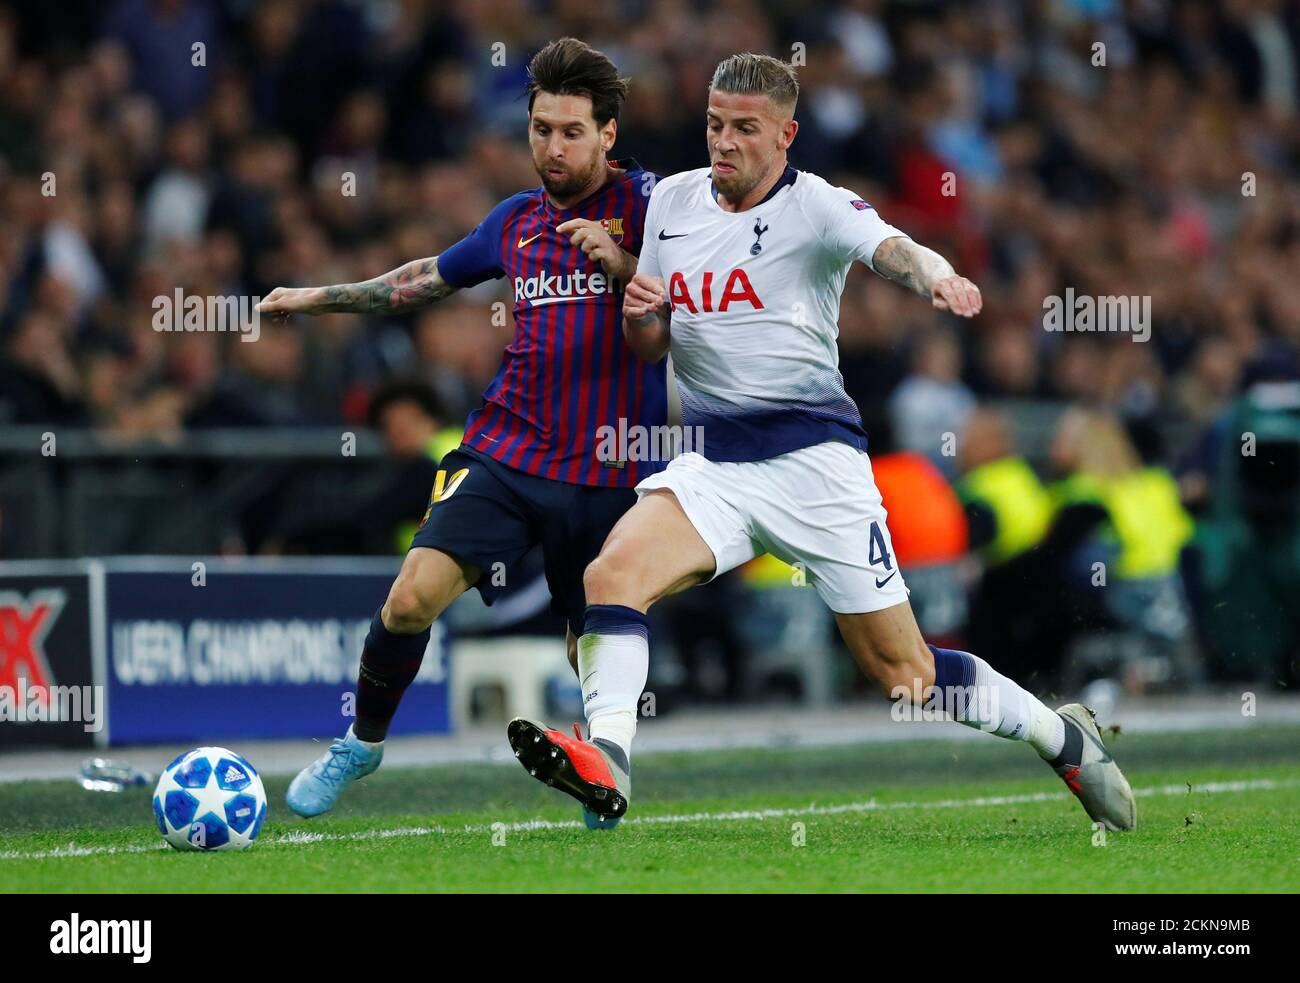 Soccer Football - Champions League - Group Stage - Group B - Tottenham Hotspur v FC Barcelona - Wembley Stadium, London, Britain - October 3, 2018  Barcelona's Lionel Messi in action with Tottenham's Toby Alderweireld   REUTERS/Eddie Keogh Stock Photo